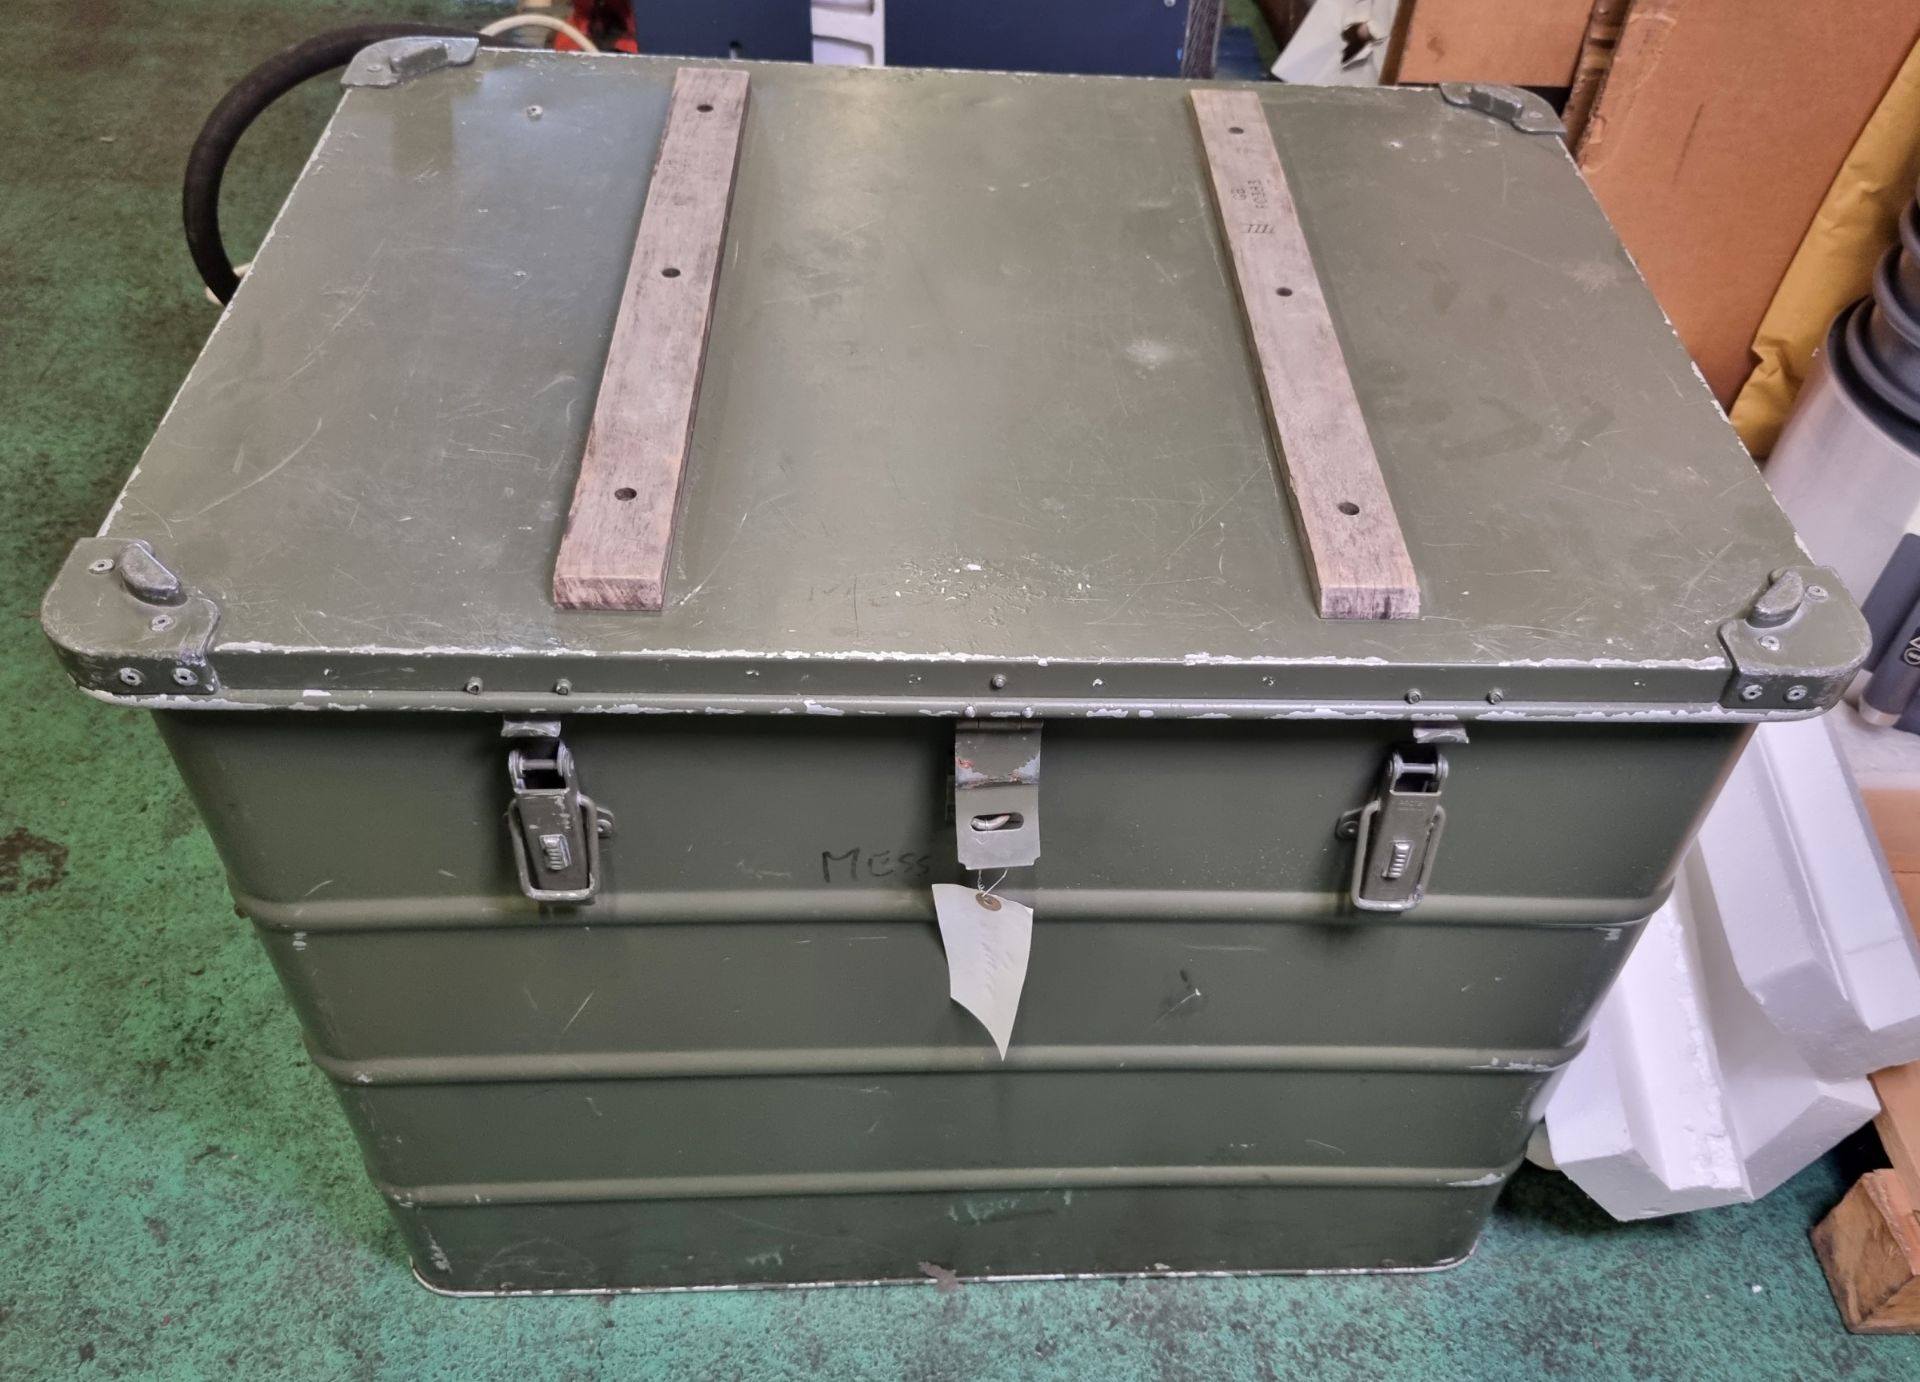 Protex aircraft storage container L80 x W59 x H62 cm - Image 4 of 6